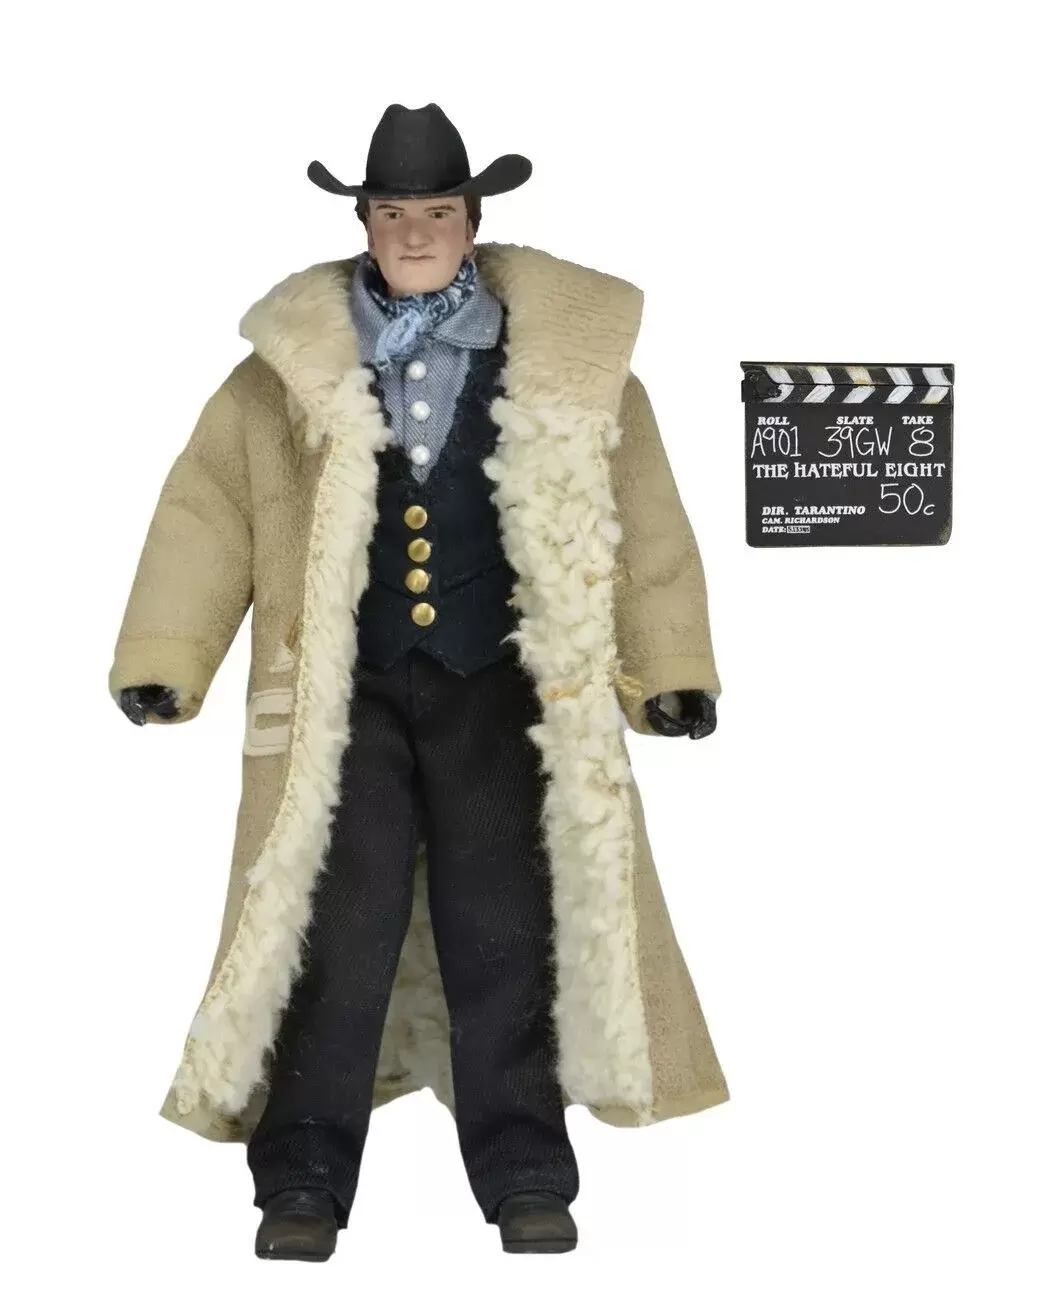 NECA - The Hateful Eight - The Writer and Director Clothed